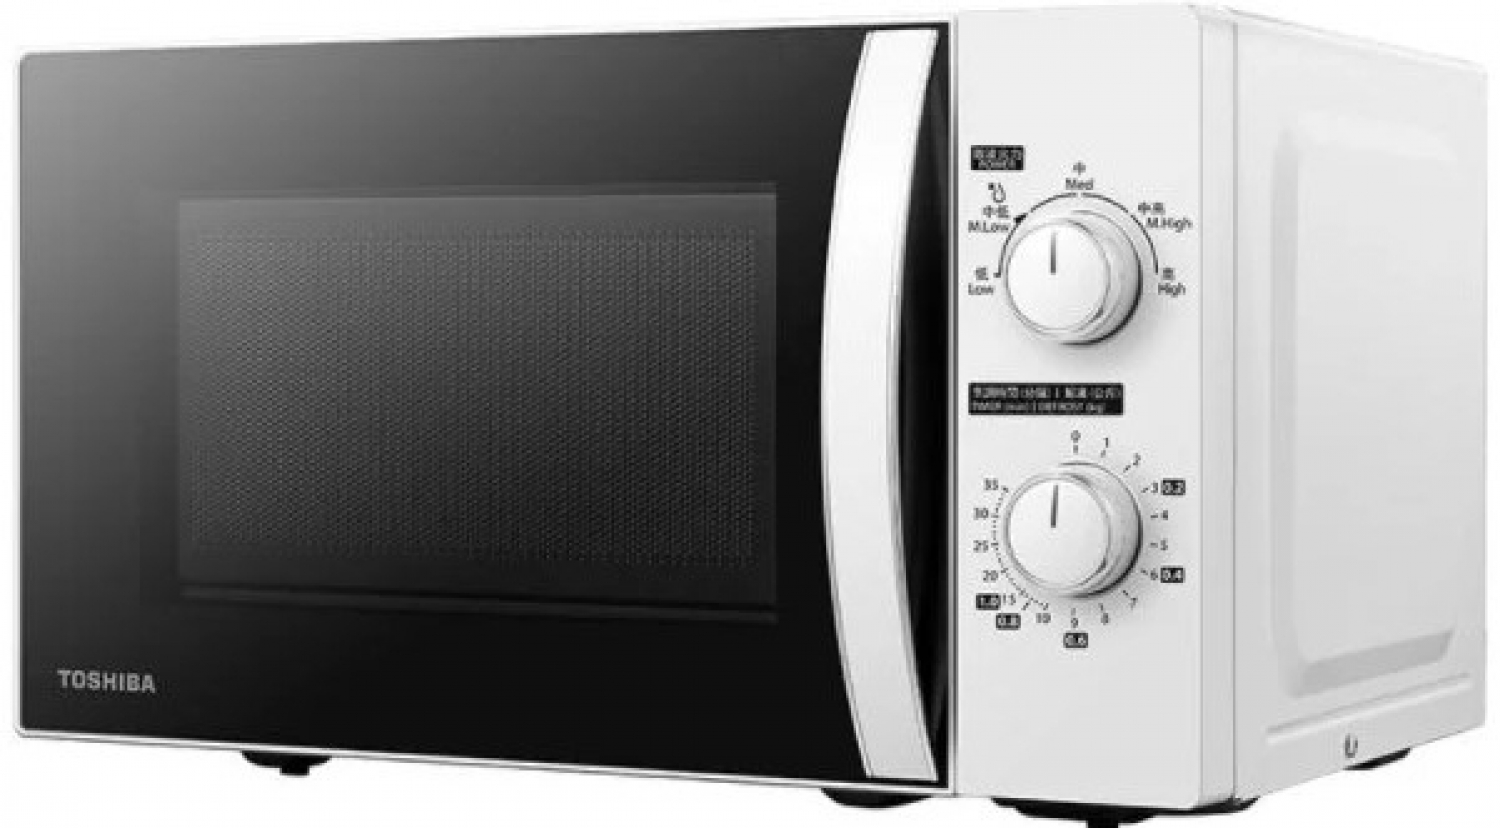 Toshiba MM-EM20P(WH) Microwave Oven 20 Liter